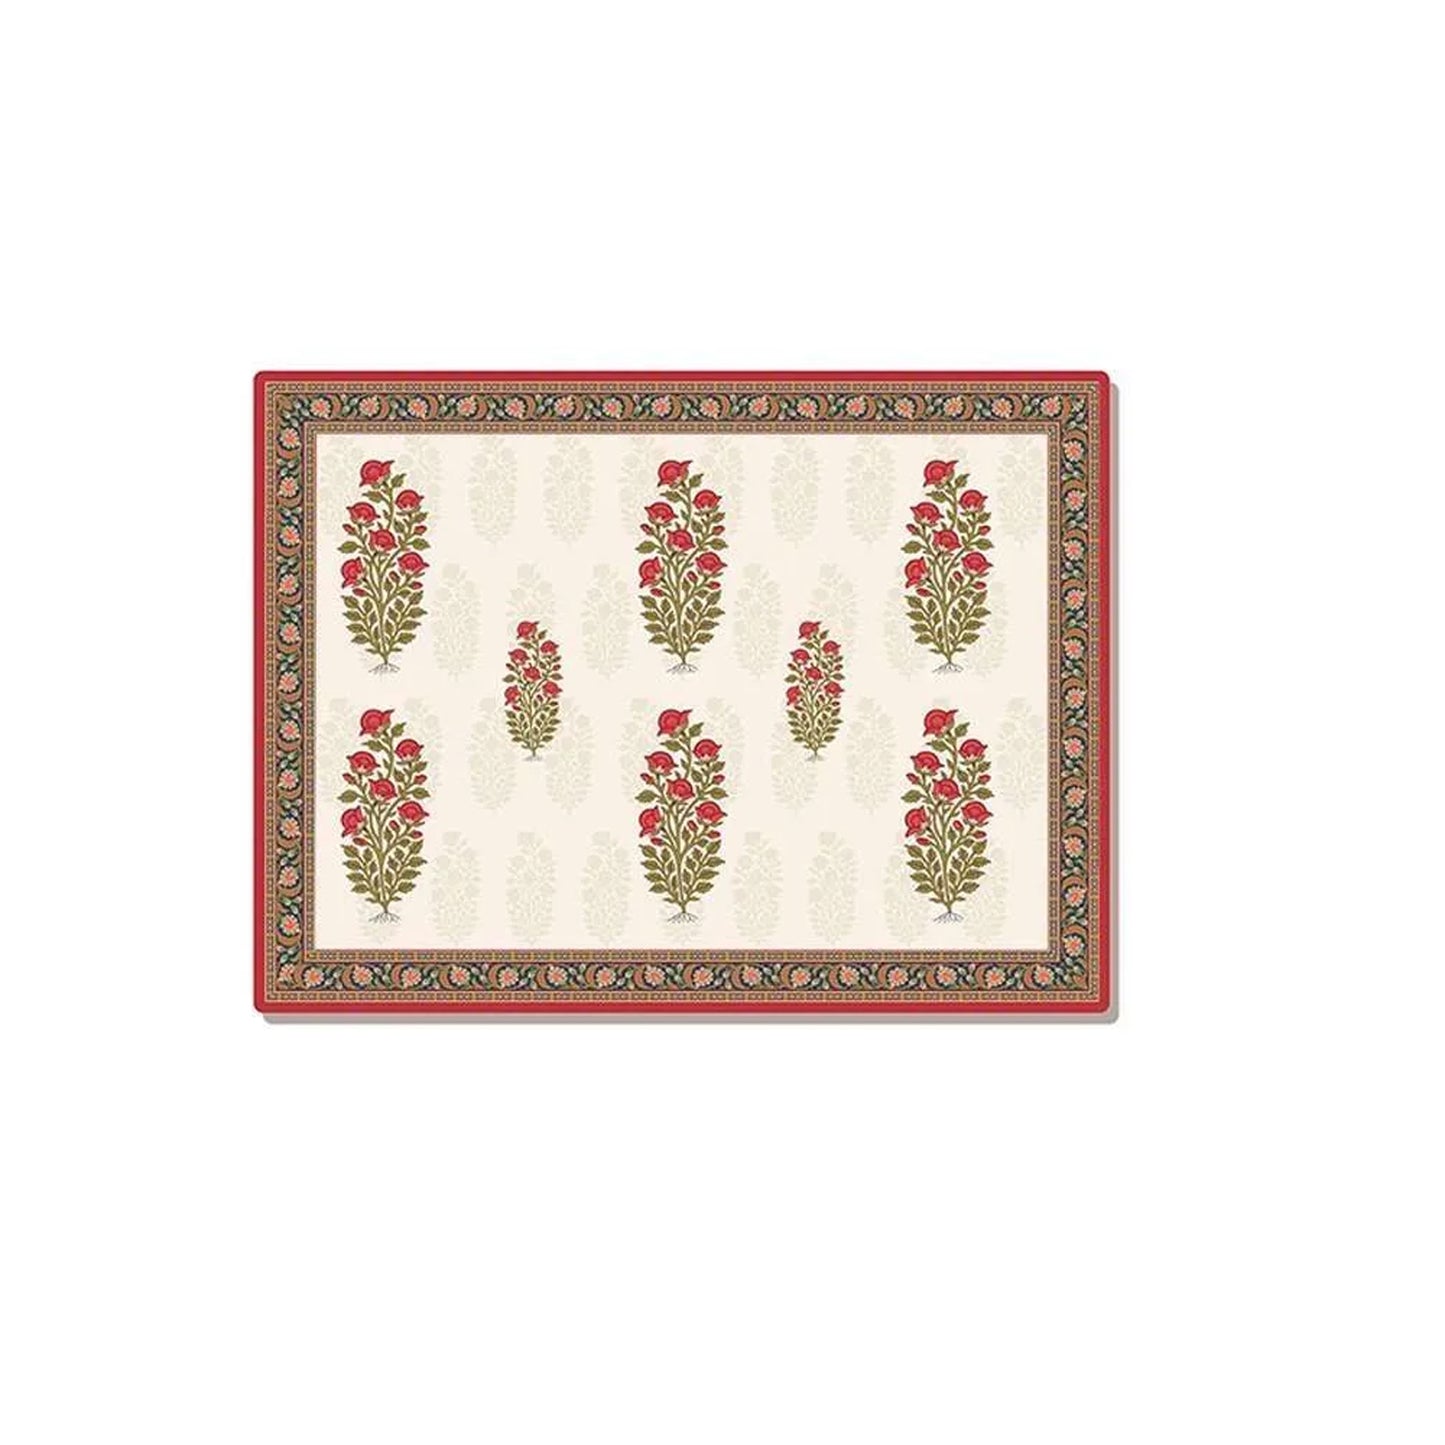 Mughal Motifs with ethnic border Table Mat | TM 009 (set of 2)